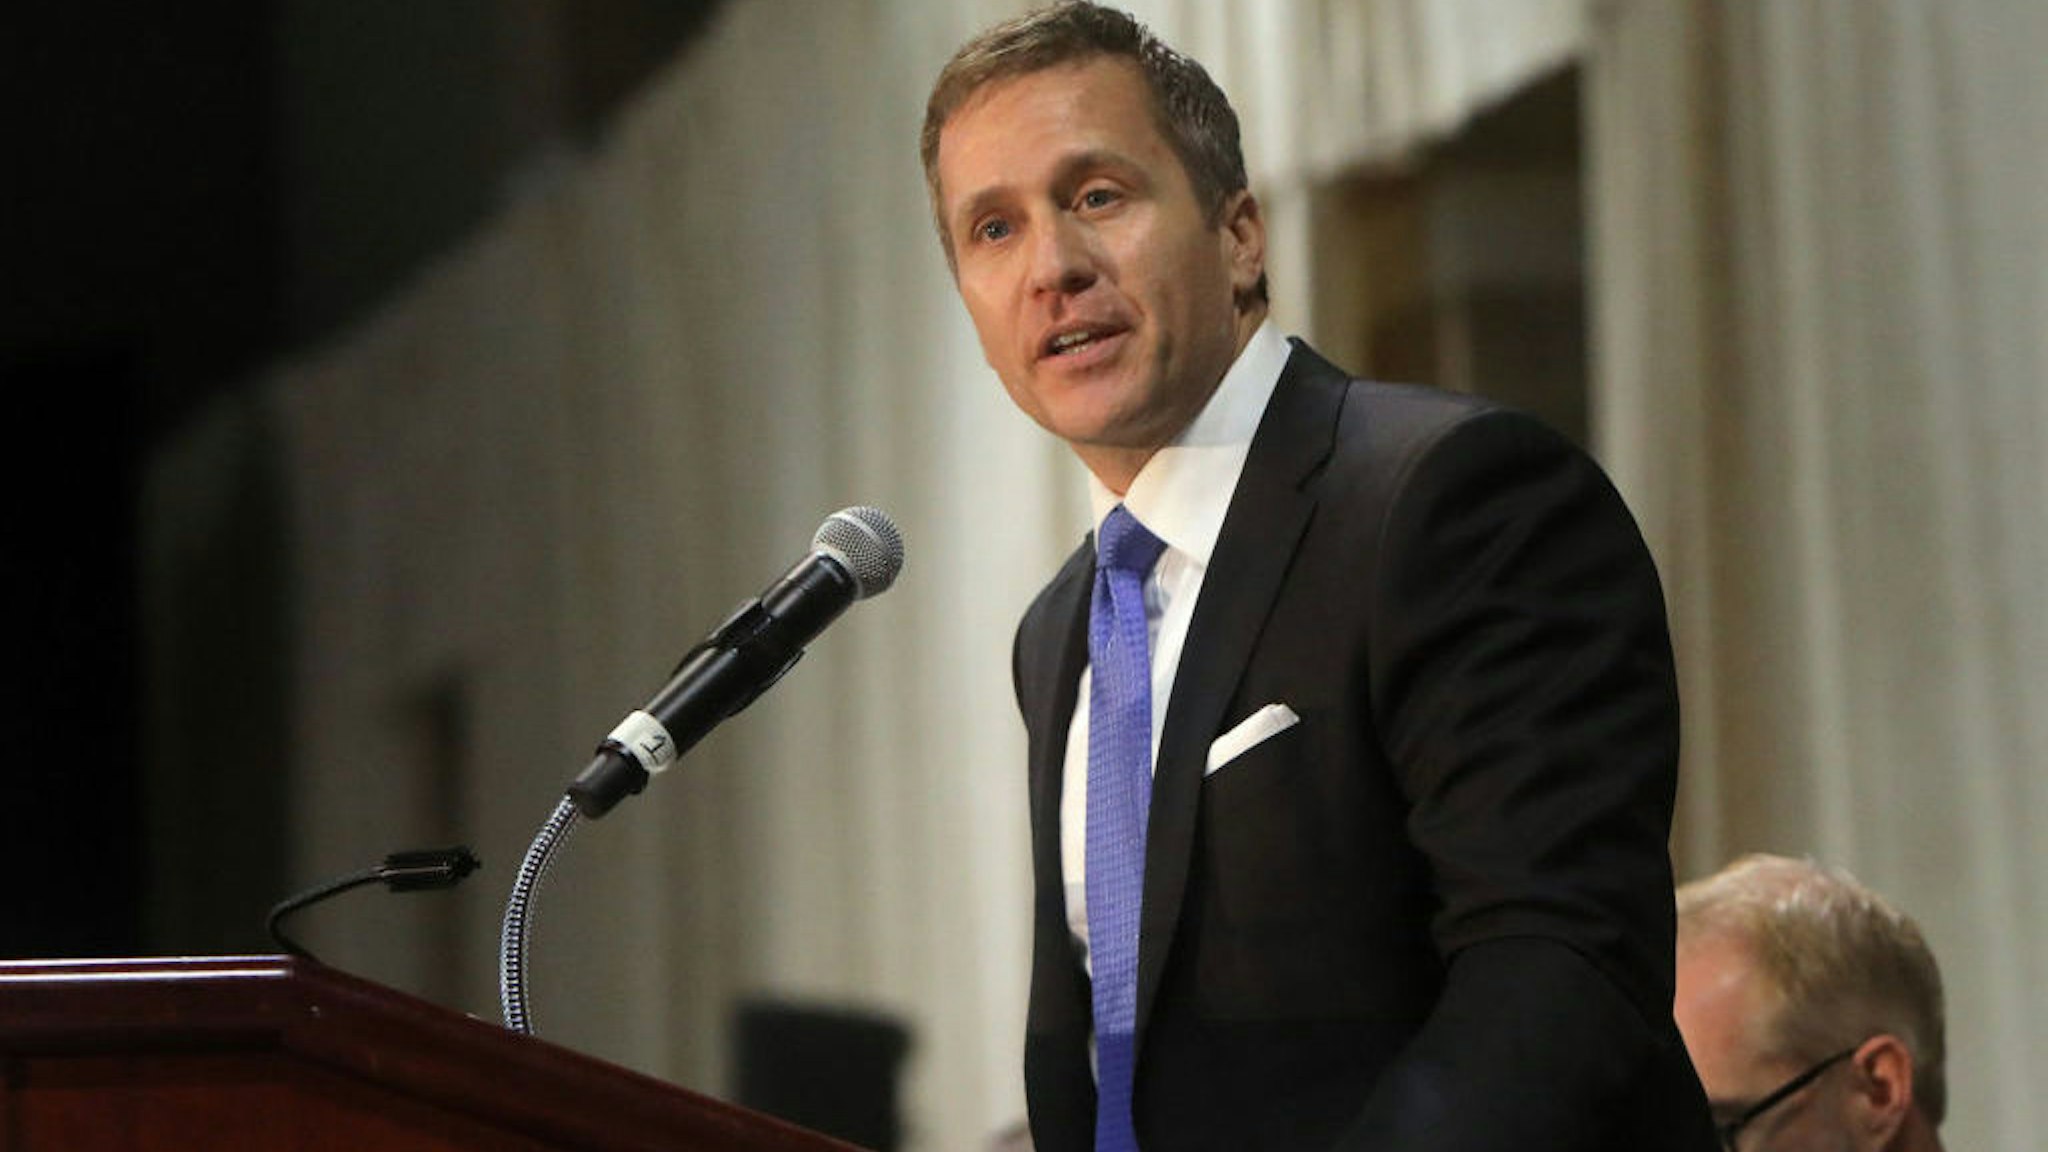 Gov. Eric Greitens delivers the keynote address at the St. Louis Area Police Chiefs Association 27th Annual Police Officer Memorial Prayer Breakfast on April 25, 2018, at the St. Charles Convention Center. (Laurie Skrivan/St. Louis Post-Dispatch/TNS)